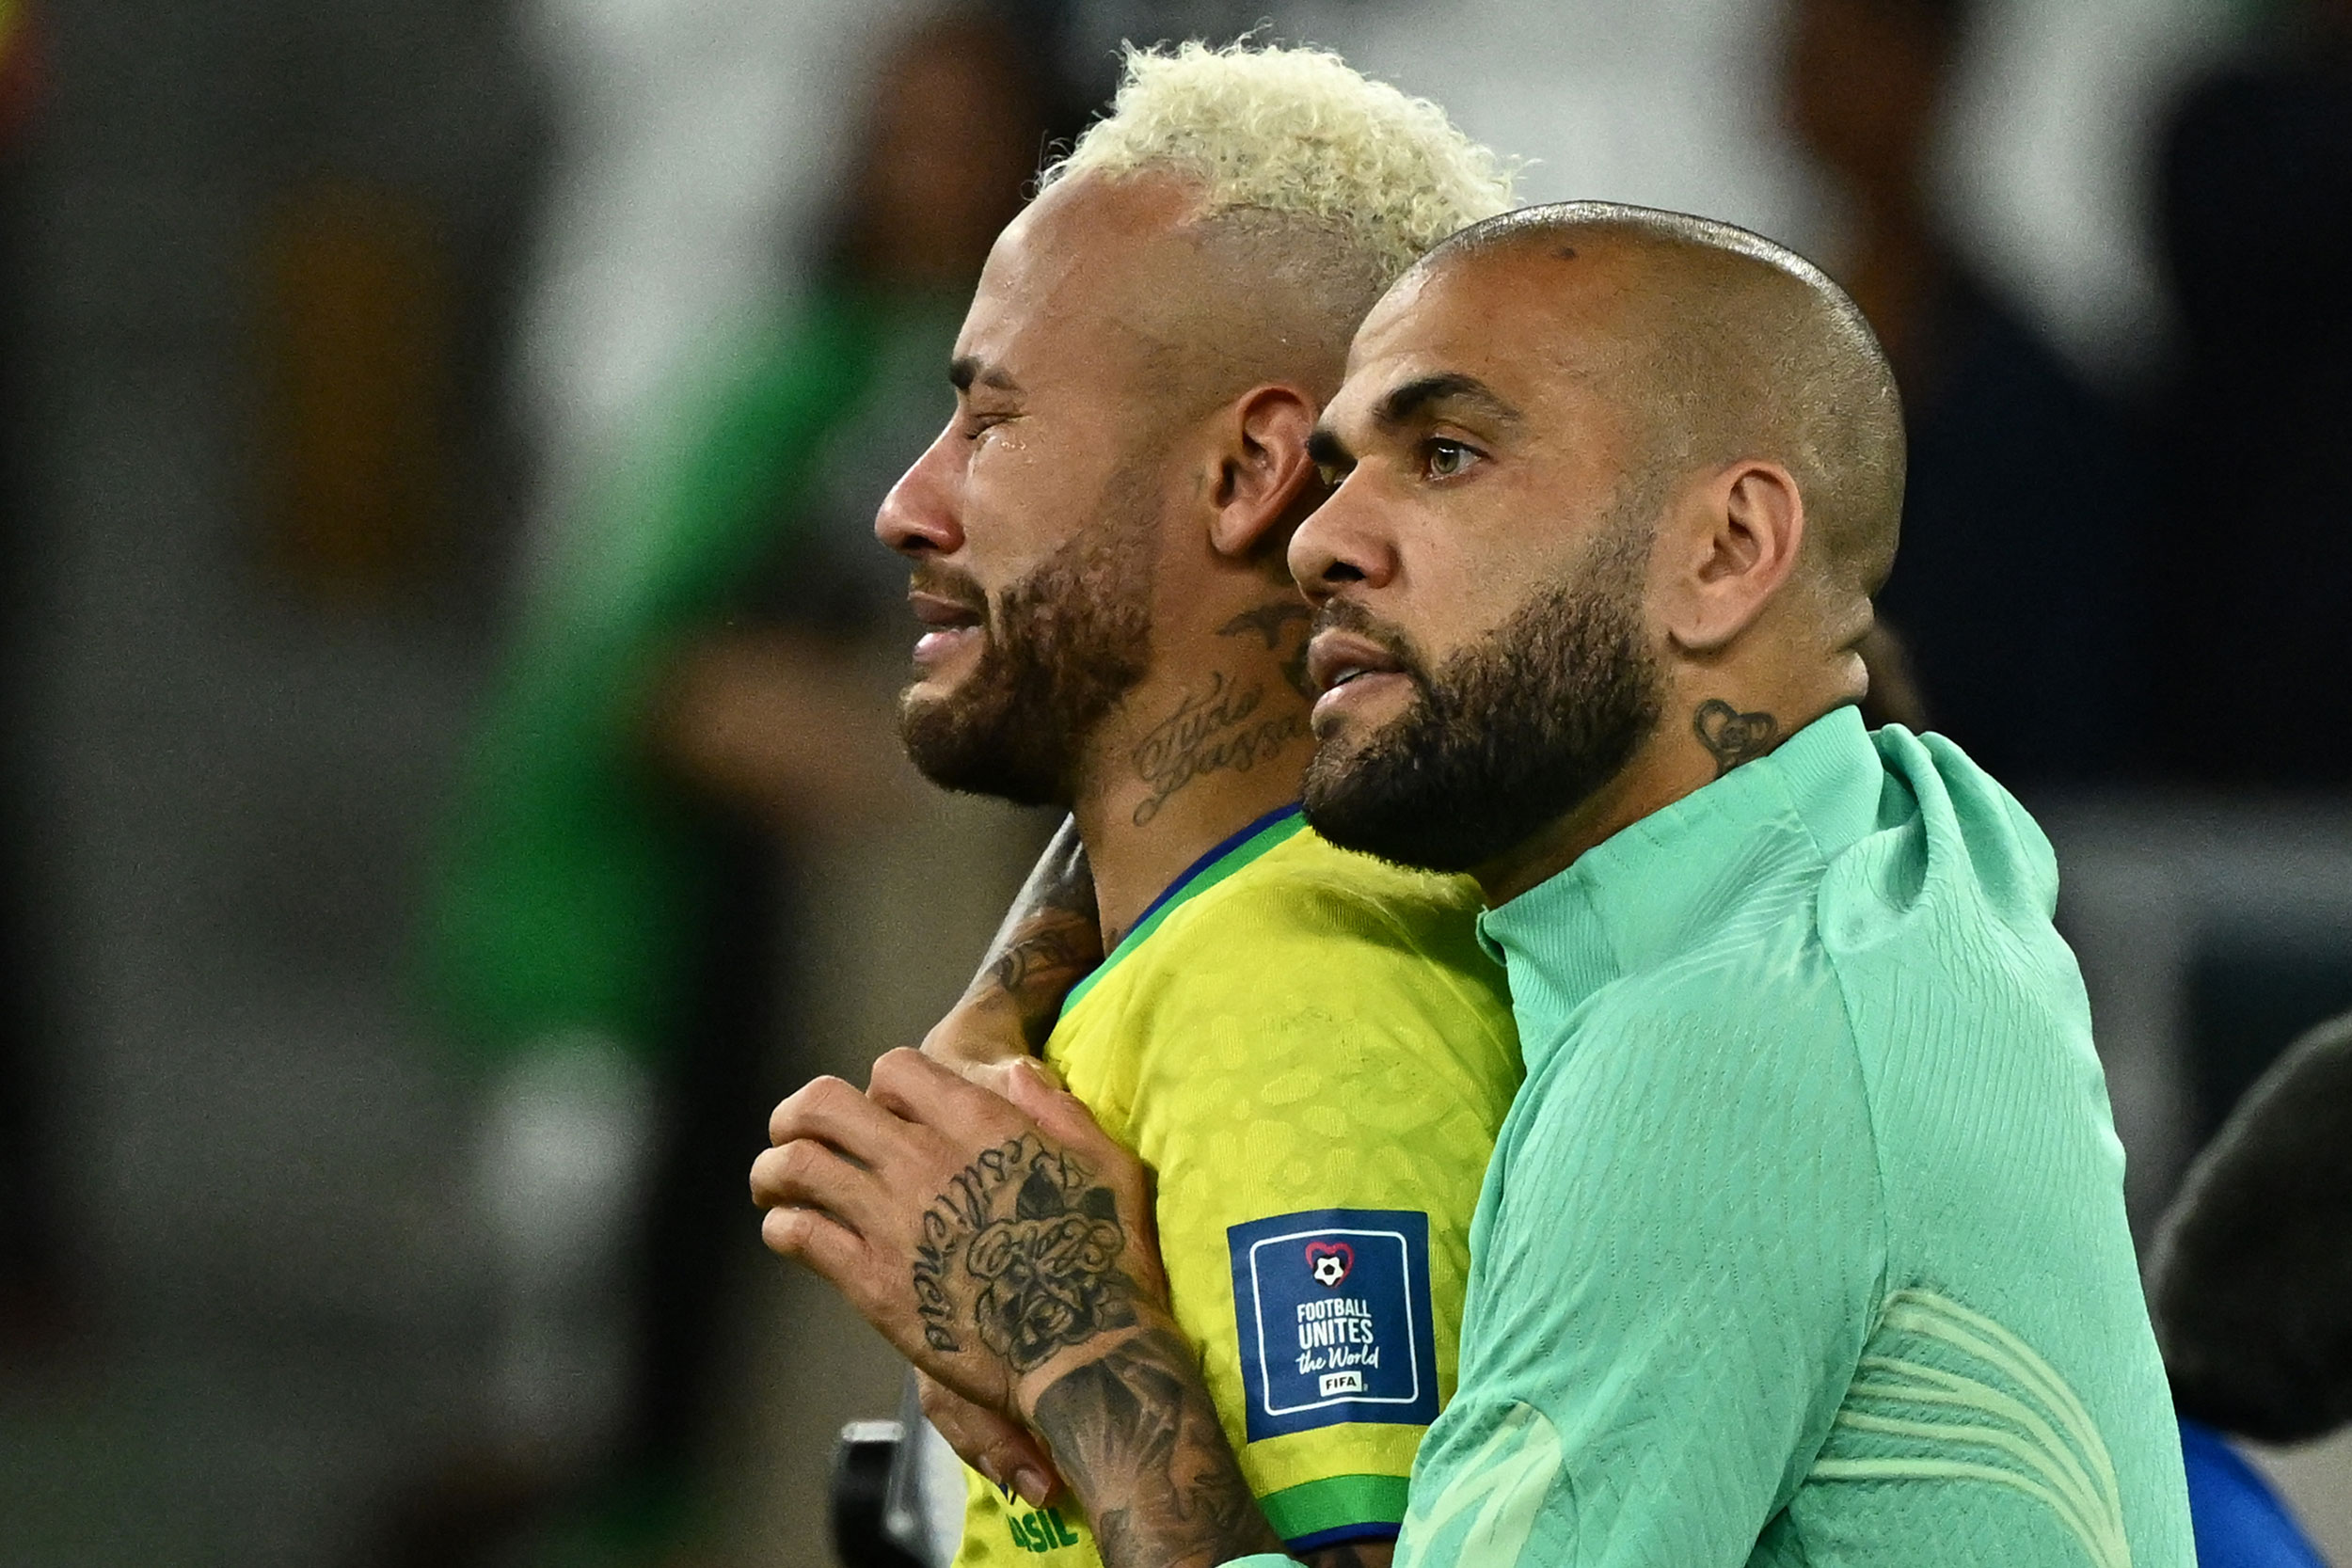 Brazil’s Neymar, left, is comforted by teammate Dani Alves after being eliminated from the World Cup.